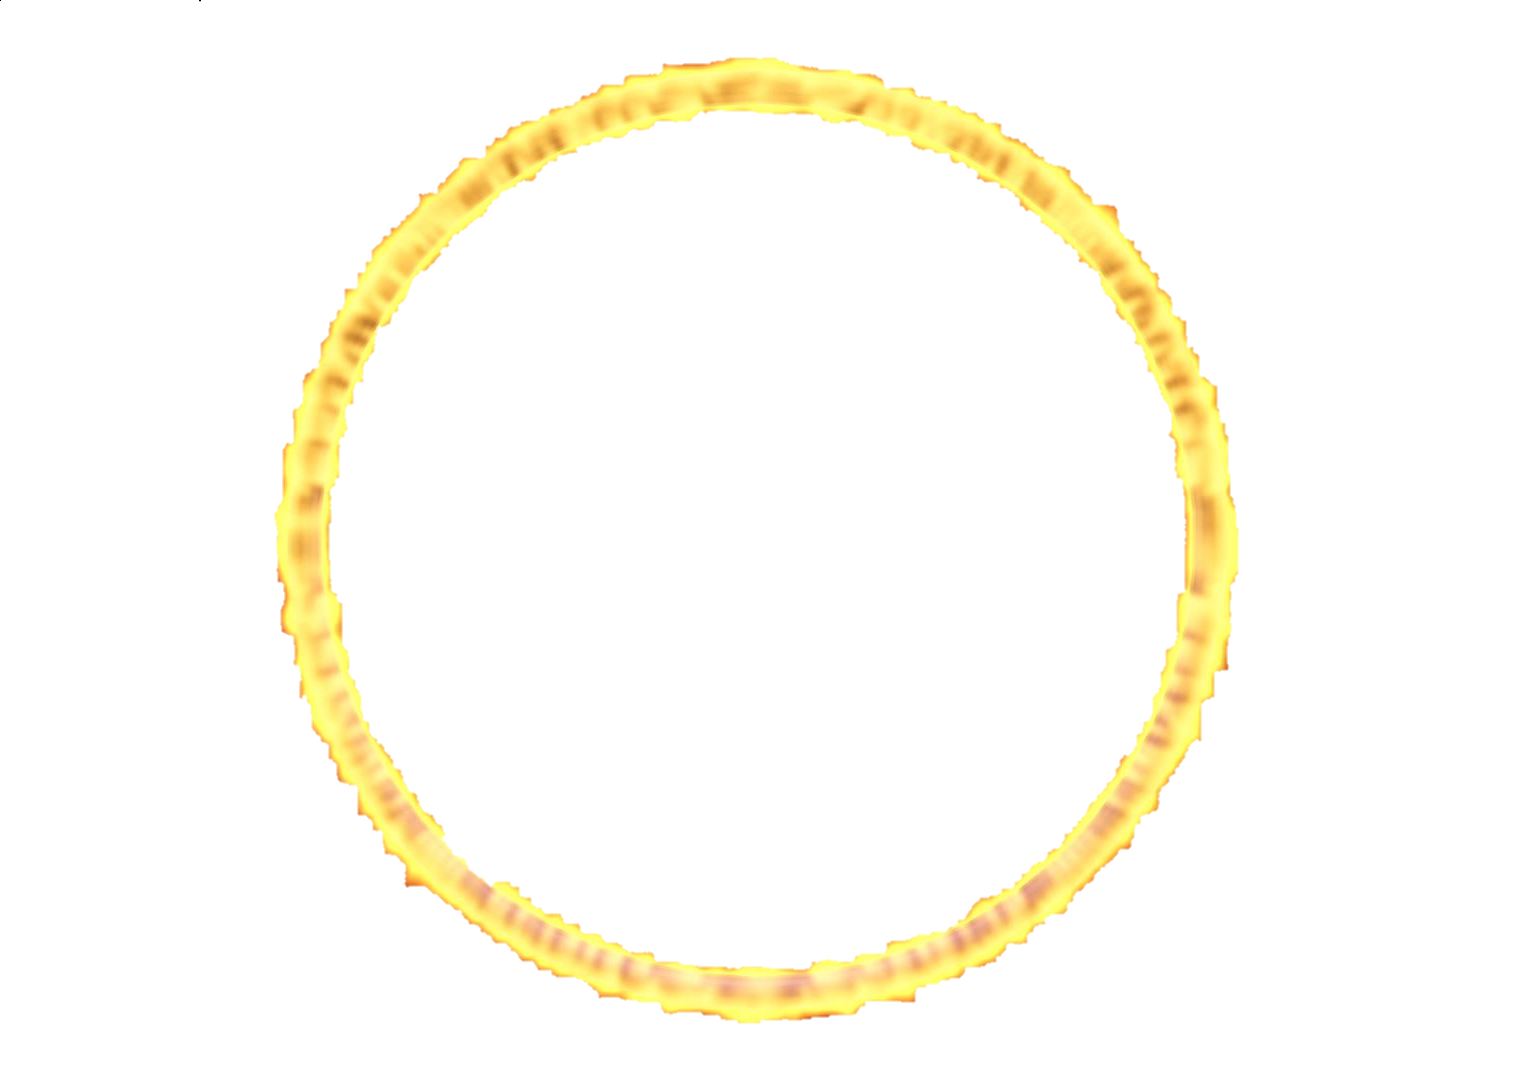 circle-png-from-pngfre-31